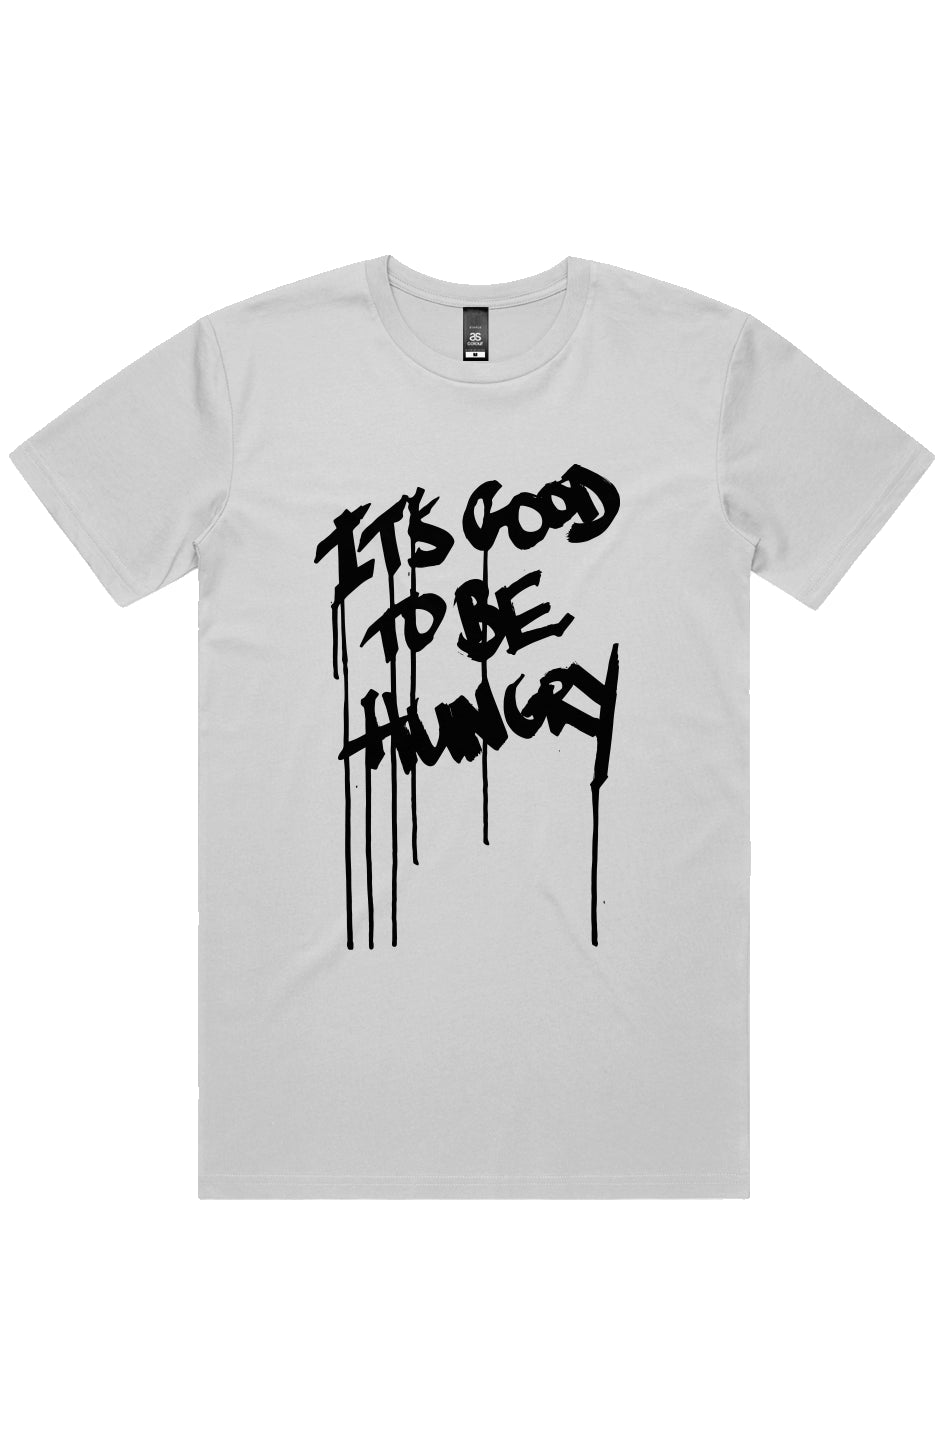 It's good to be hungry (black on white)